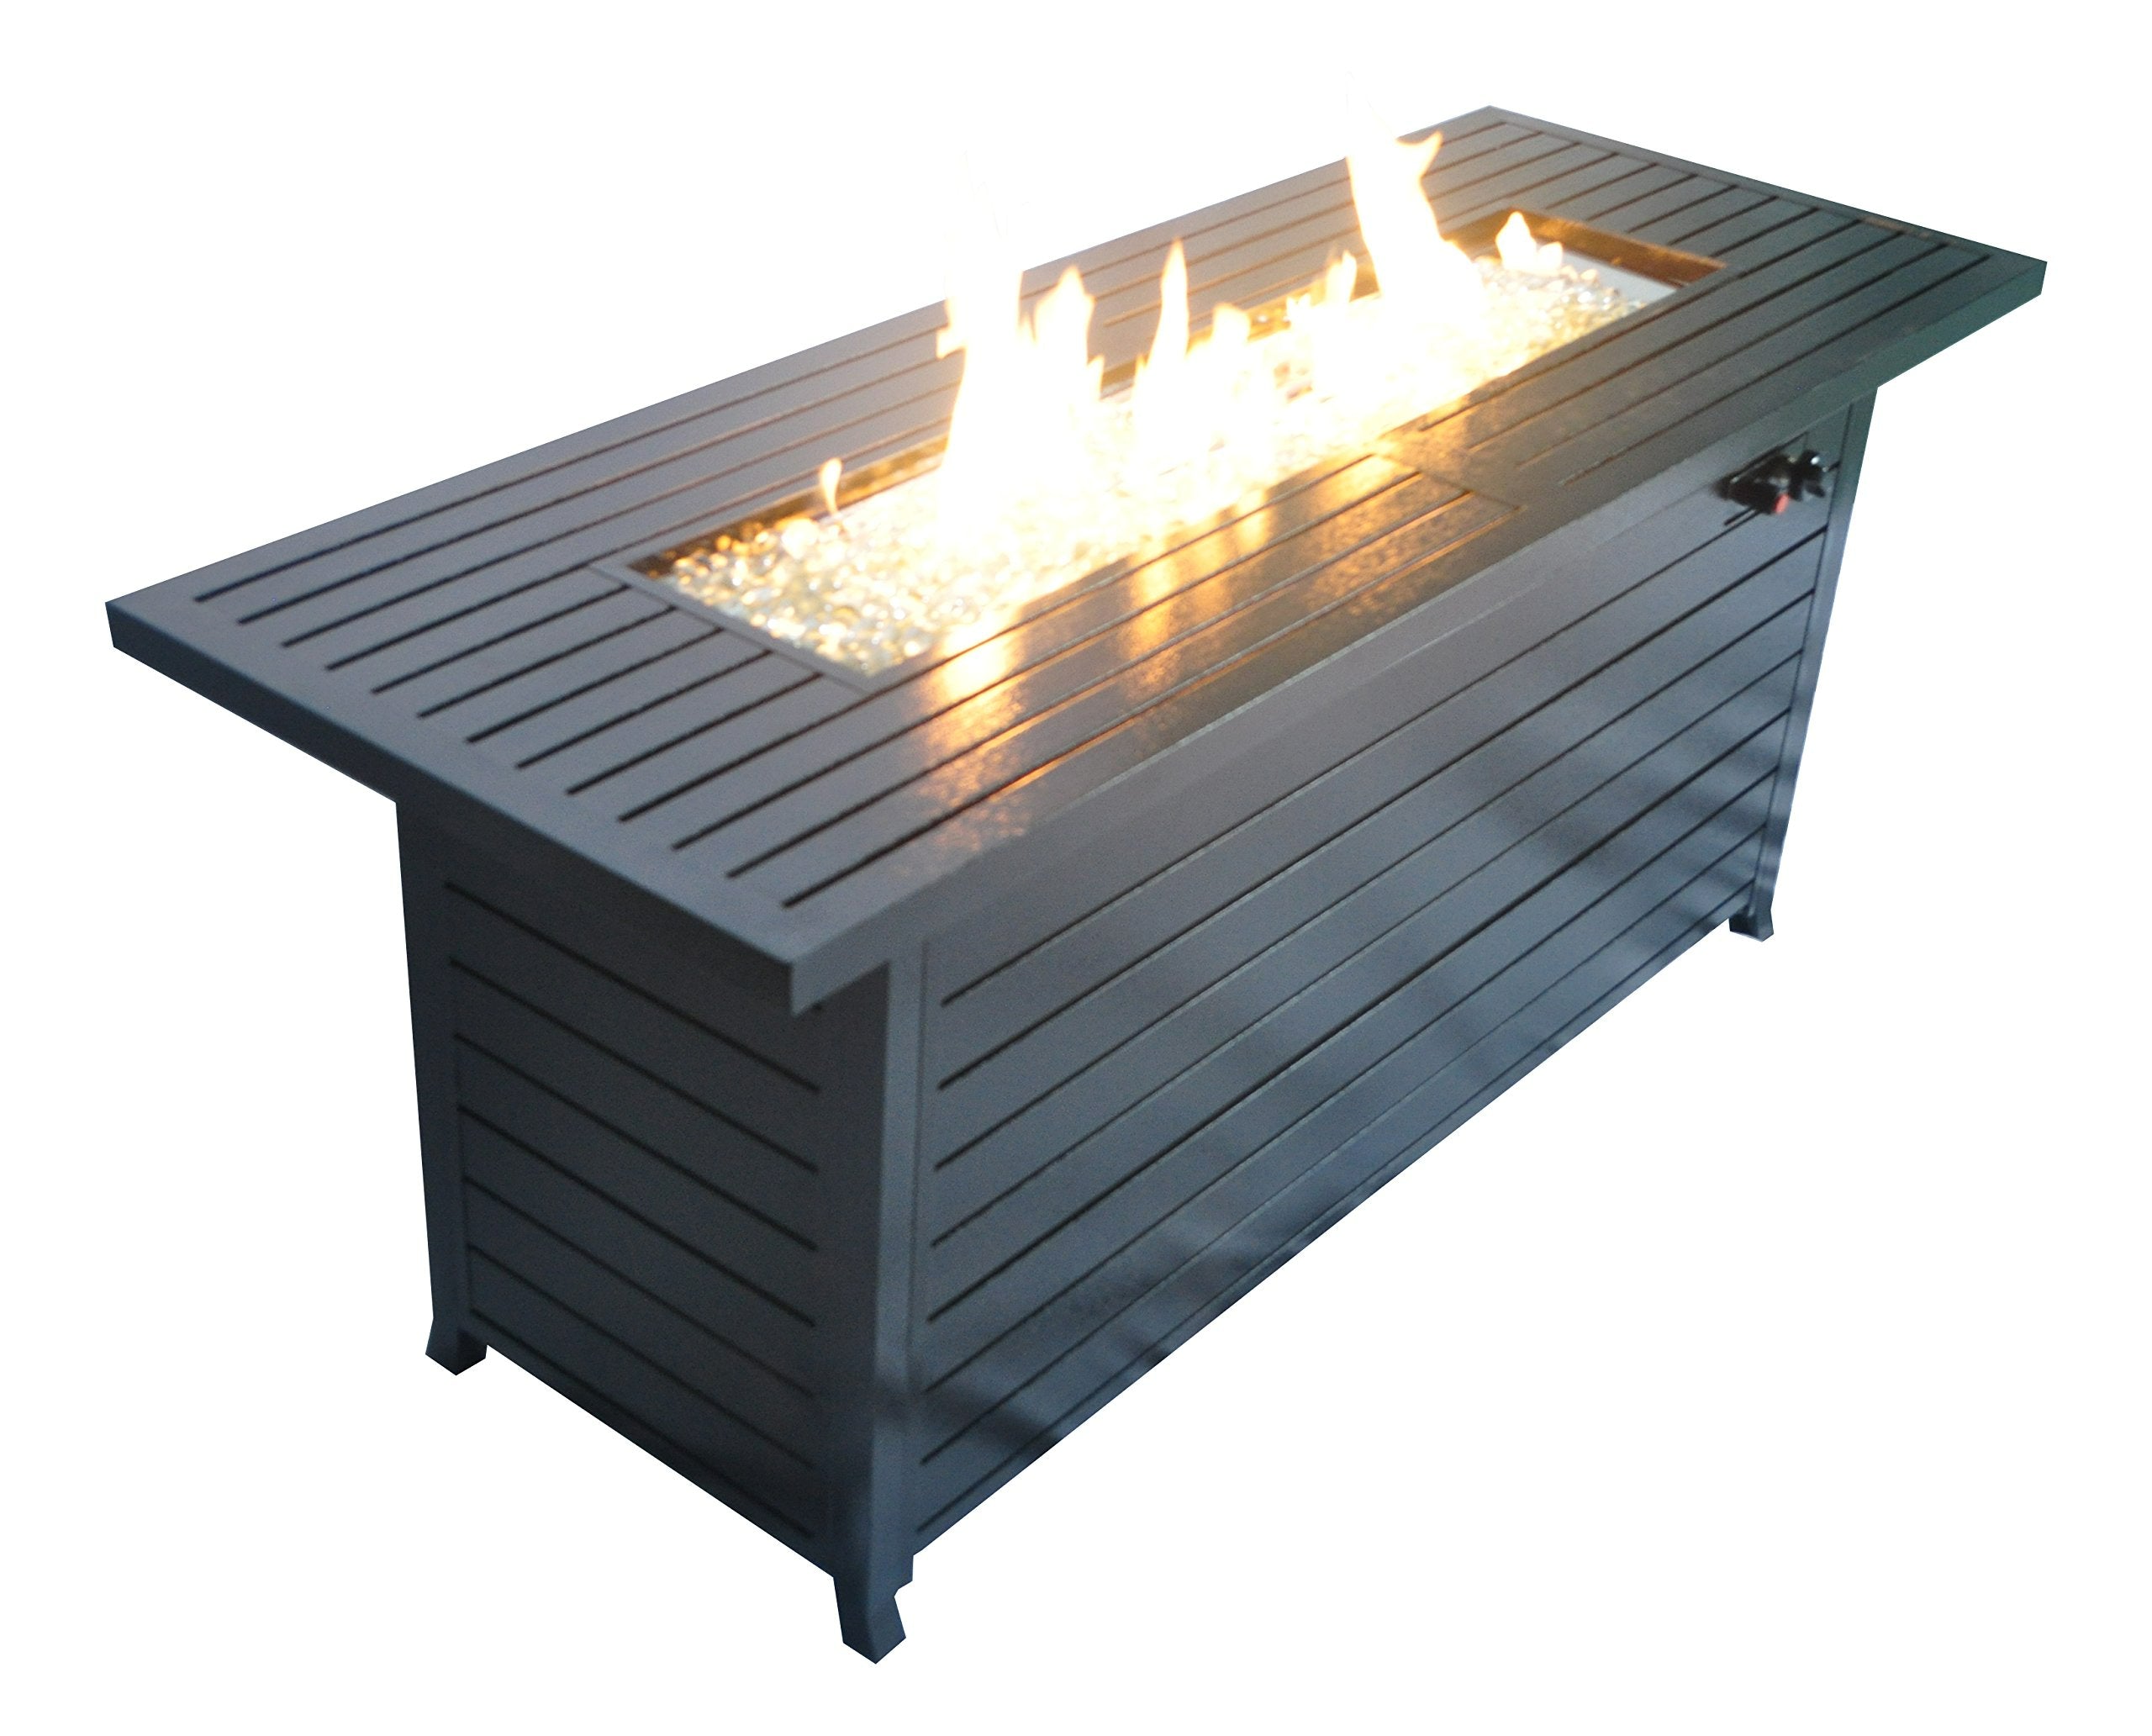 57in Outdoor Gas Propane Fire Pit Table 50000BTU with Lid, Glass Beads, ETL Certification